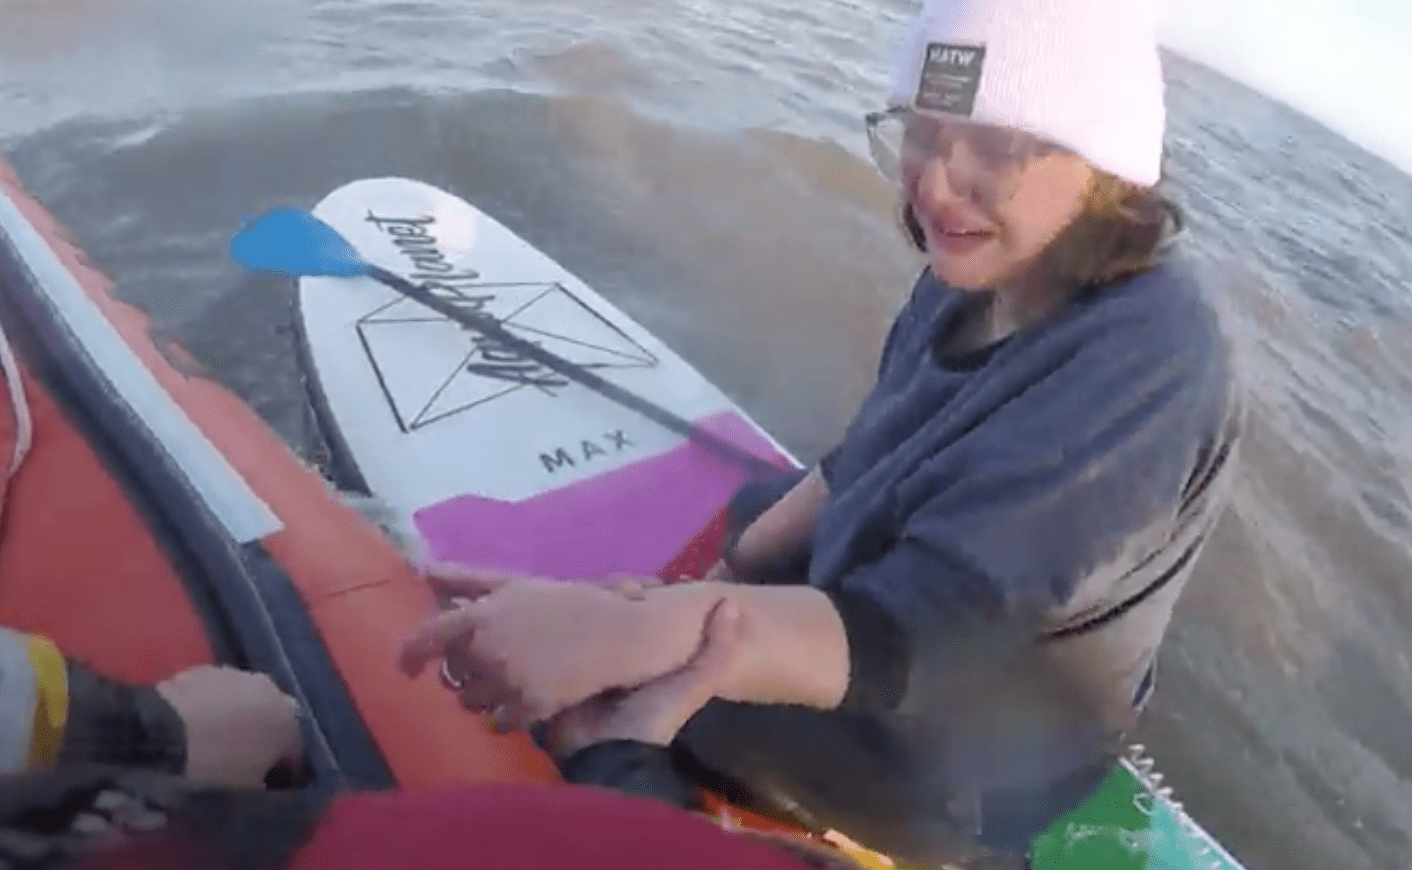 Paddleboarder shares her story after rescue by RNLI Lifeboats off Penarth coast